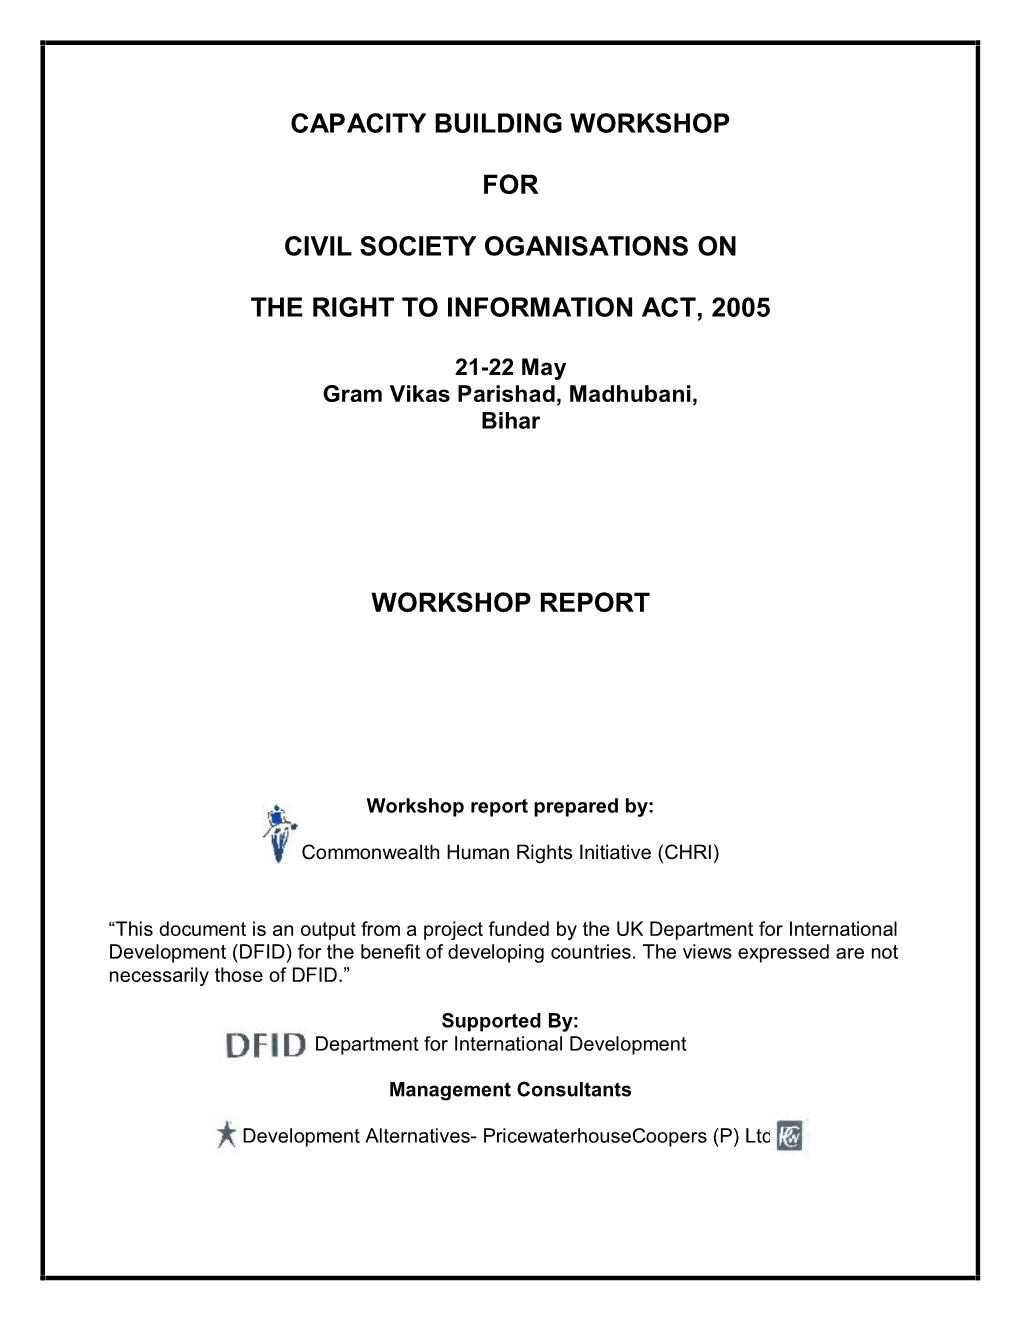 Capacity Building Workshop for Civil Society Oganisations on the Right To